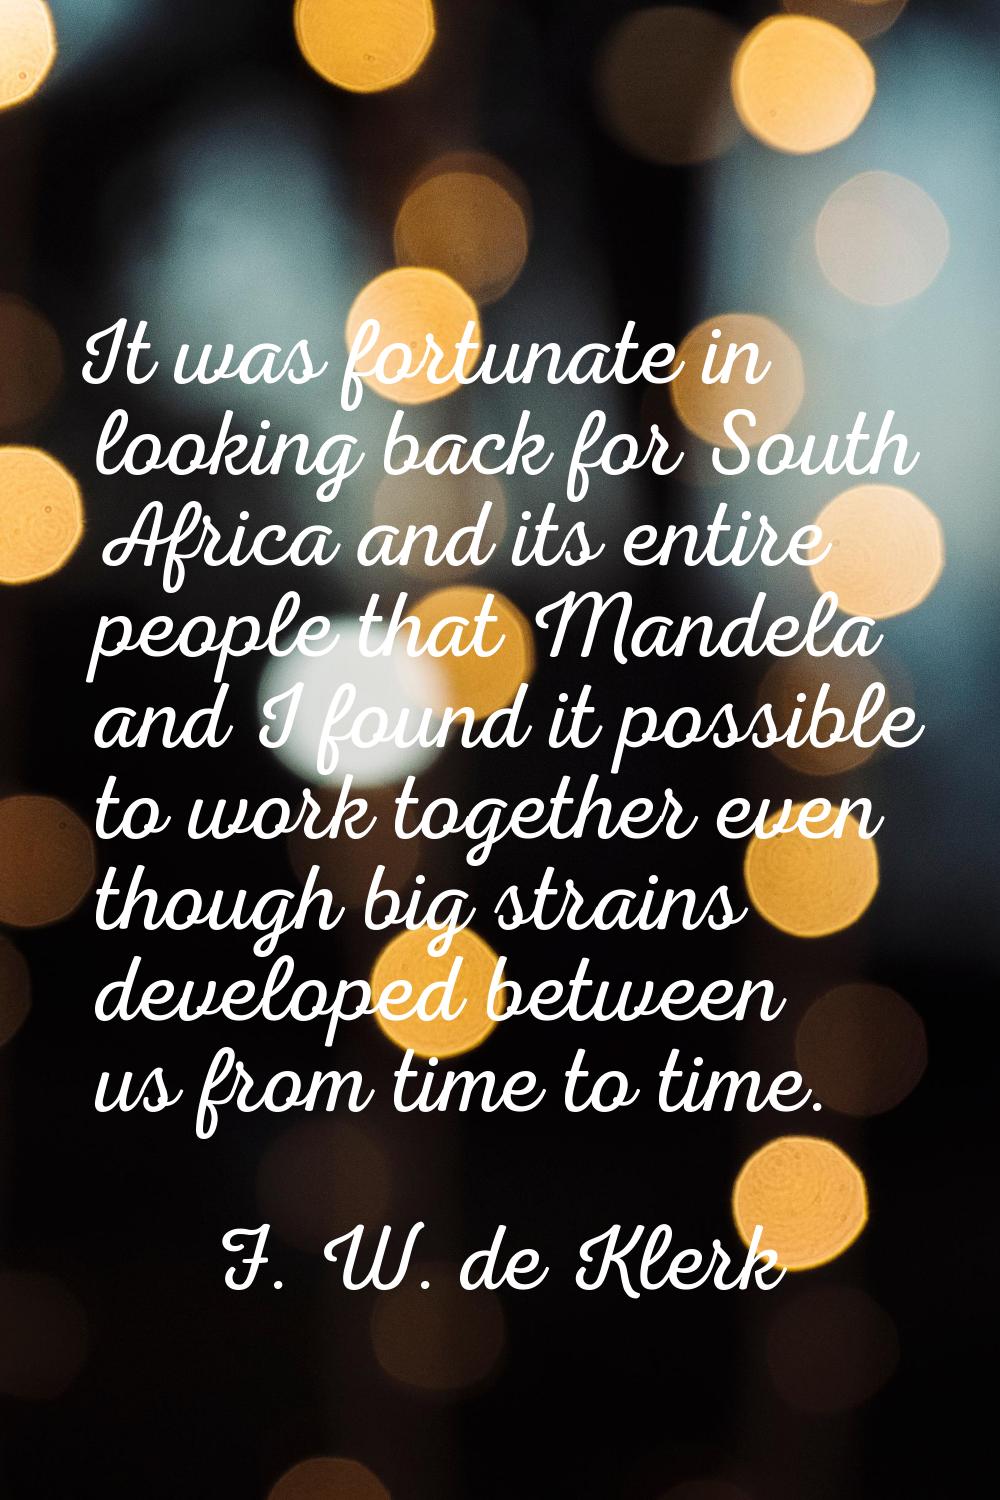 It was fortunate in looking back for South Africa and its entire people that Mandela and I found it